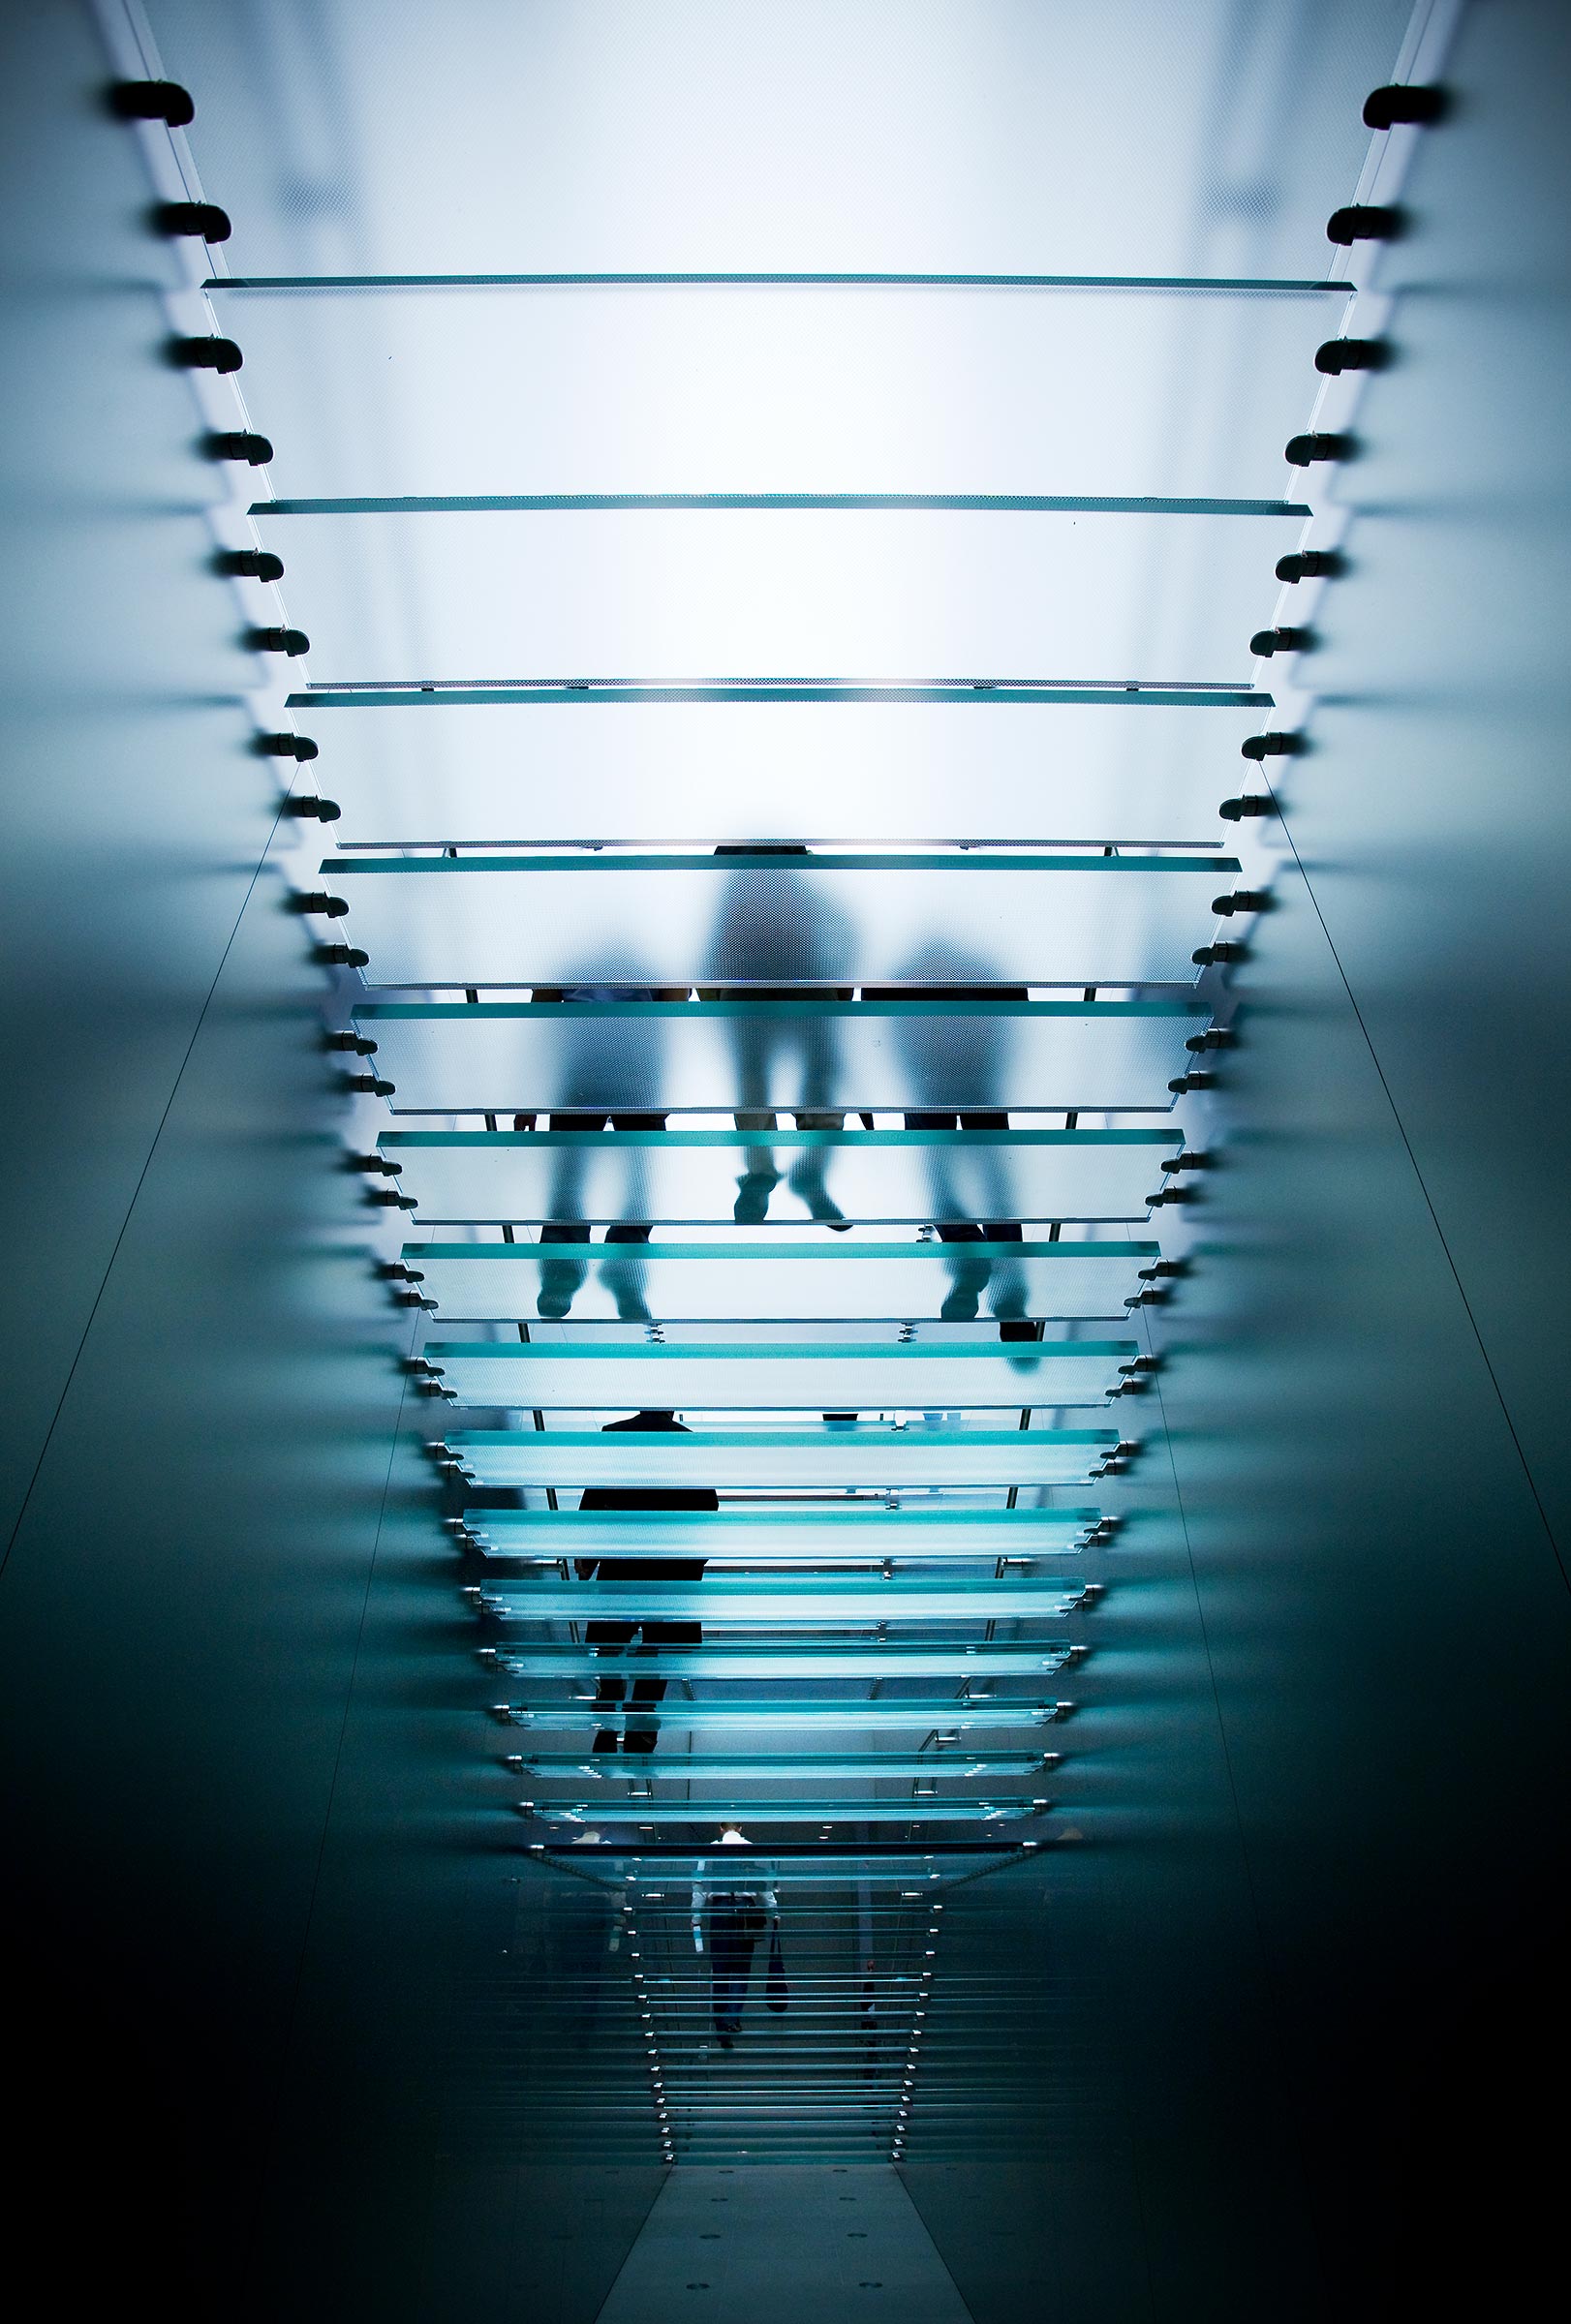 Architectural interior creative photography silhouettes of 5 people walking down opaque glass stairs